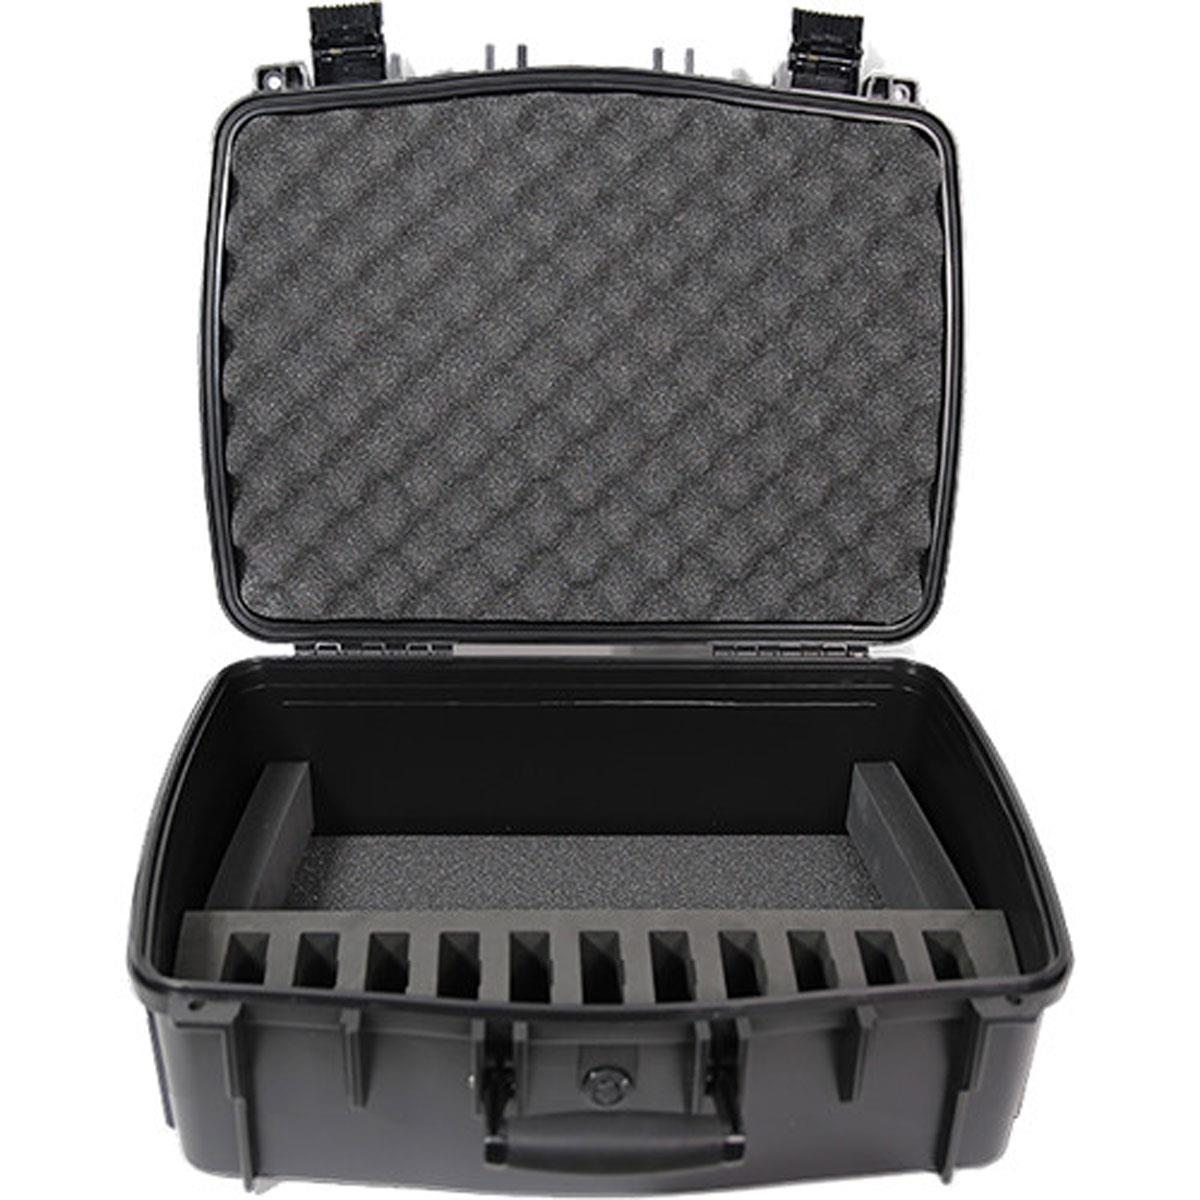 Image of Williams Sound Water Resistant Carry Case with 11 Slot Foam Insert